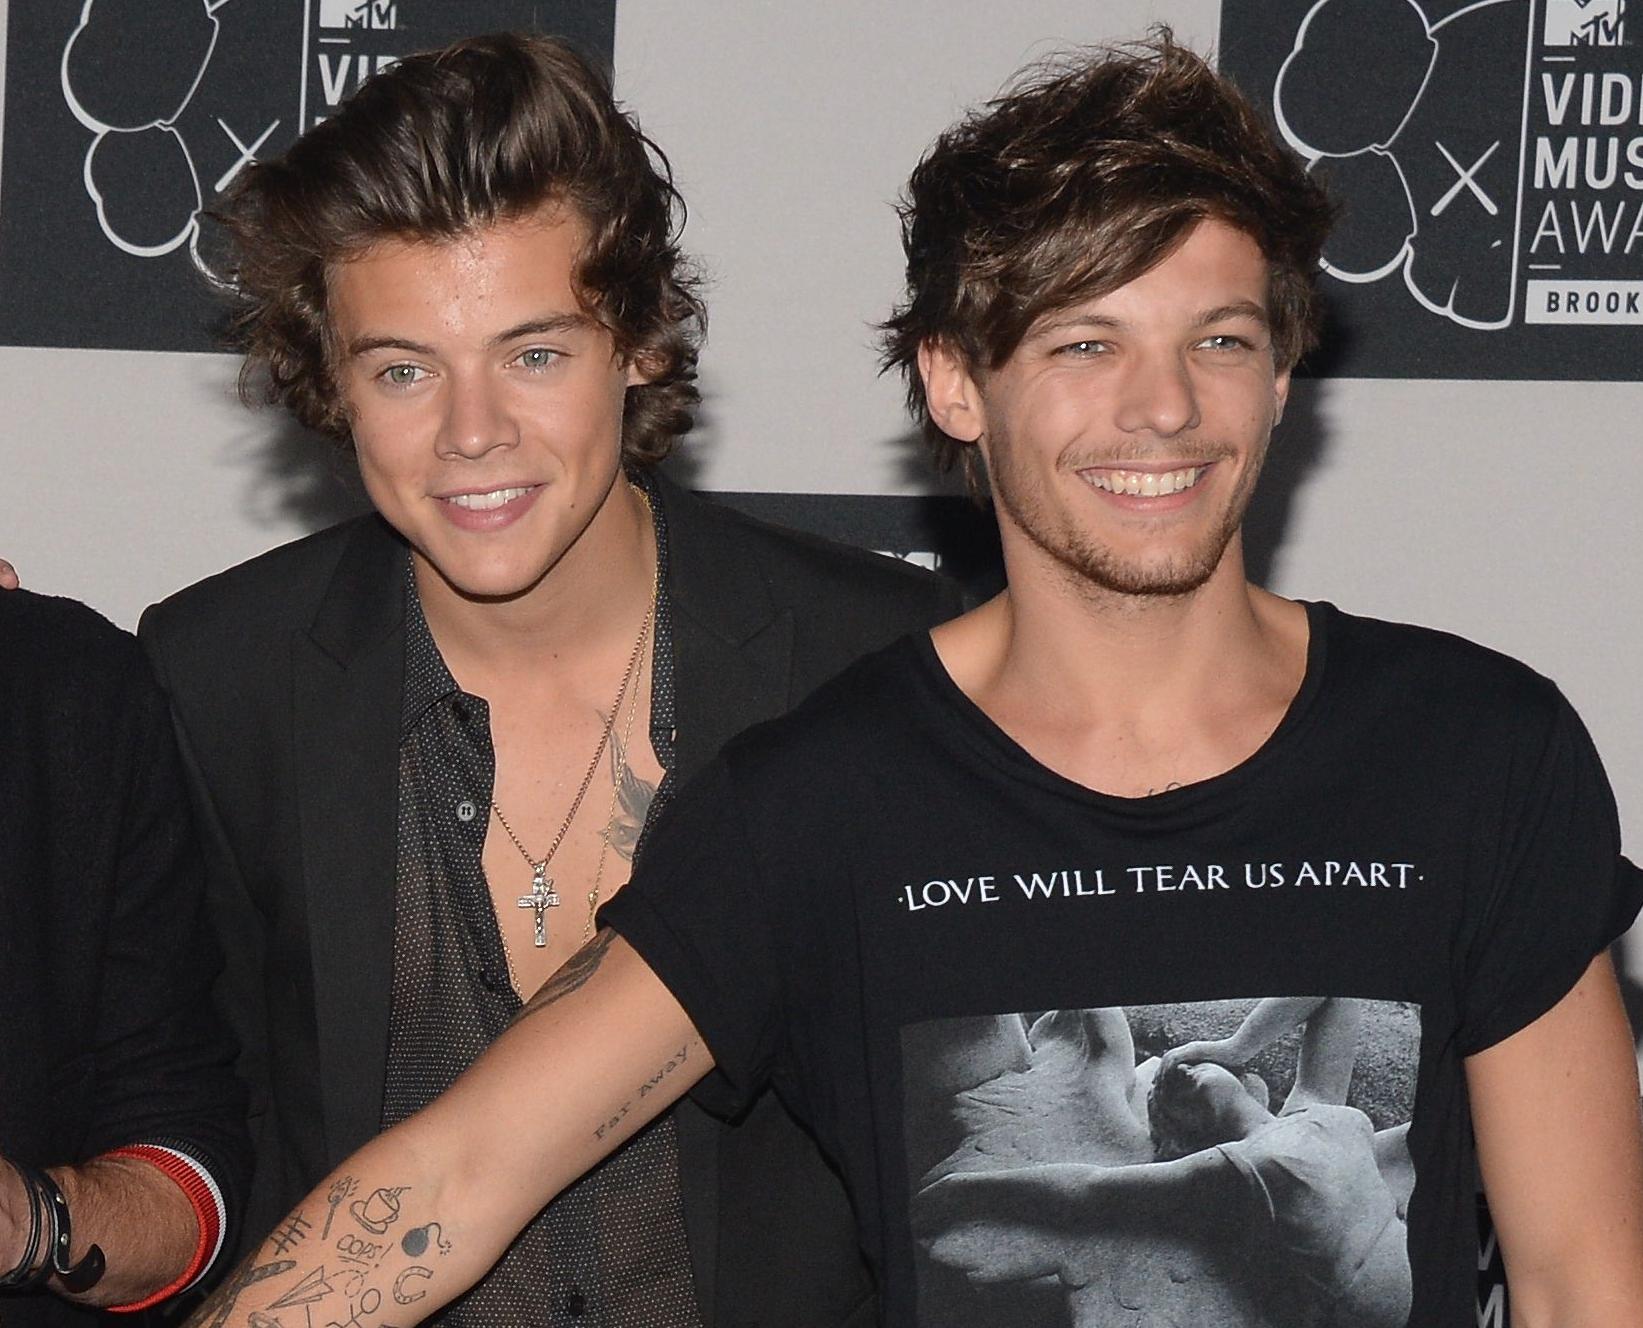 Louis Tomlinson hints at envy towards Harry Styles after One Direction's breakup - VG